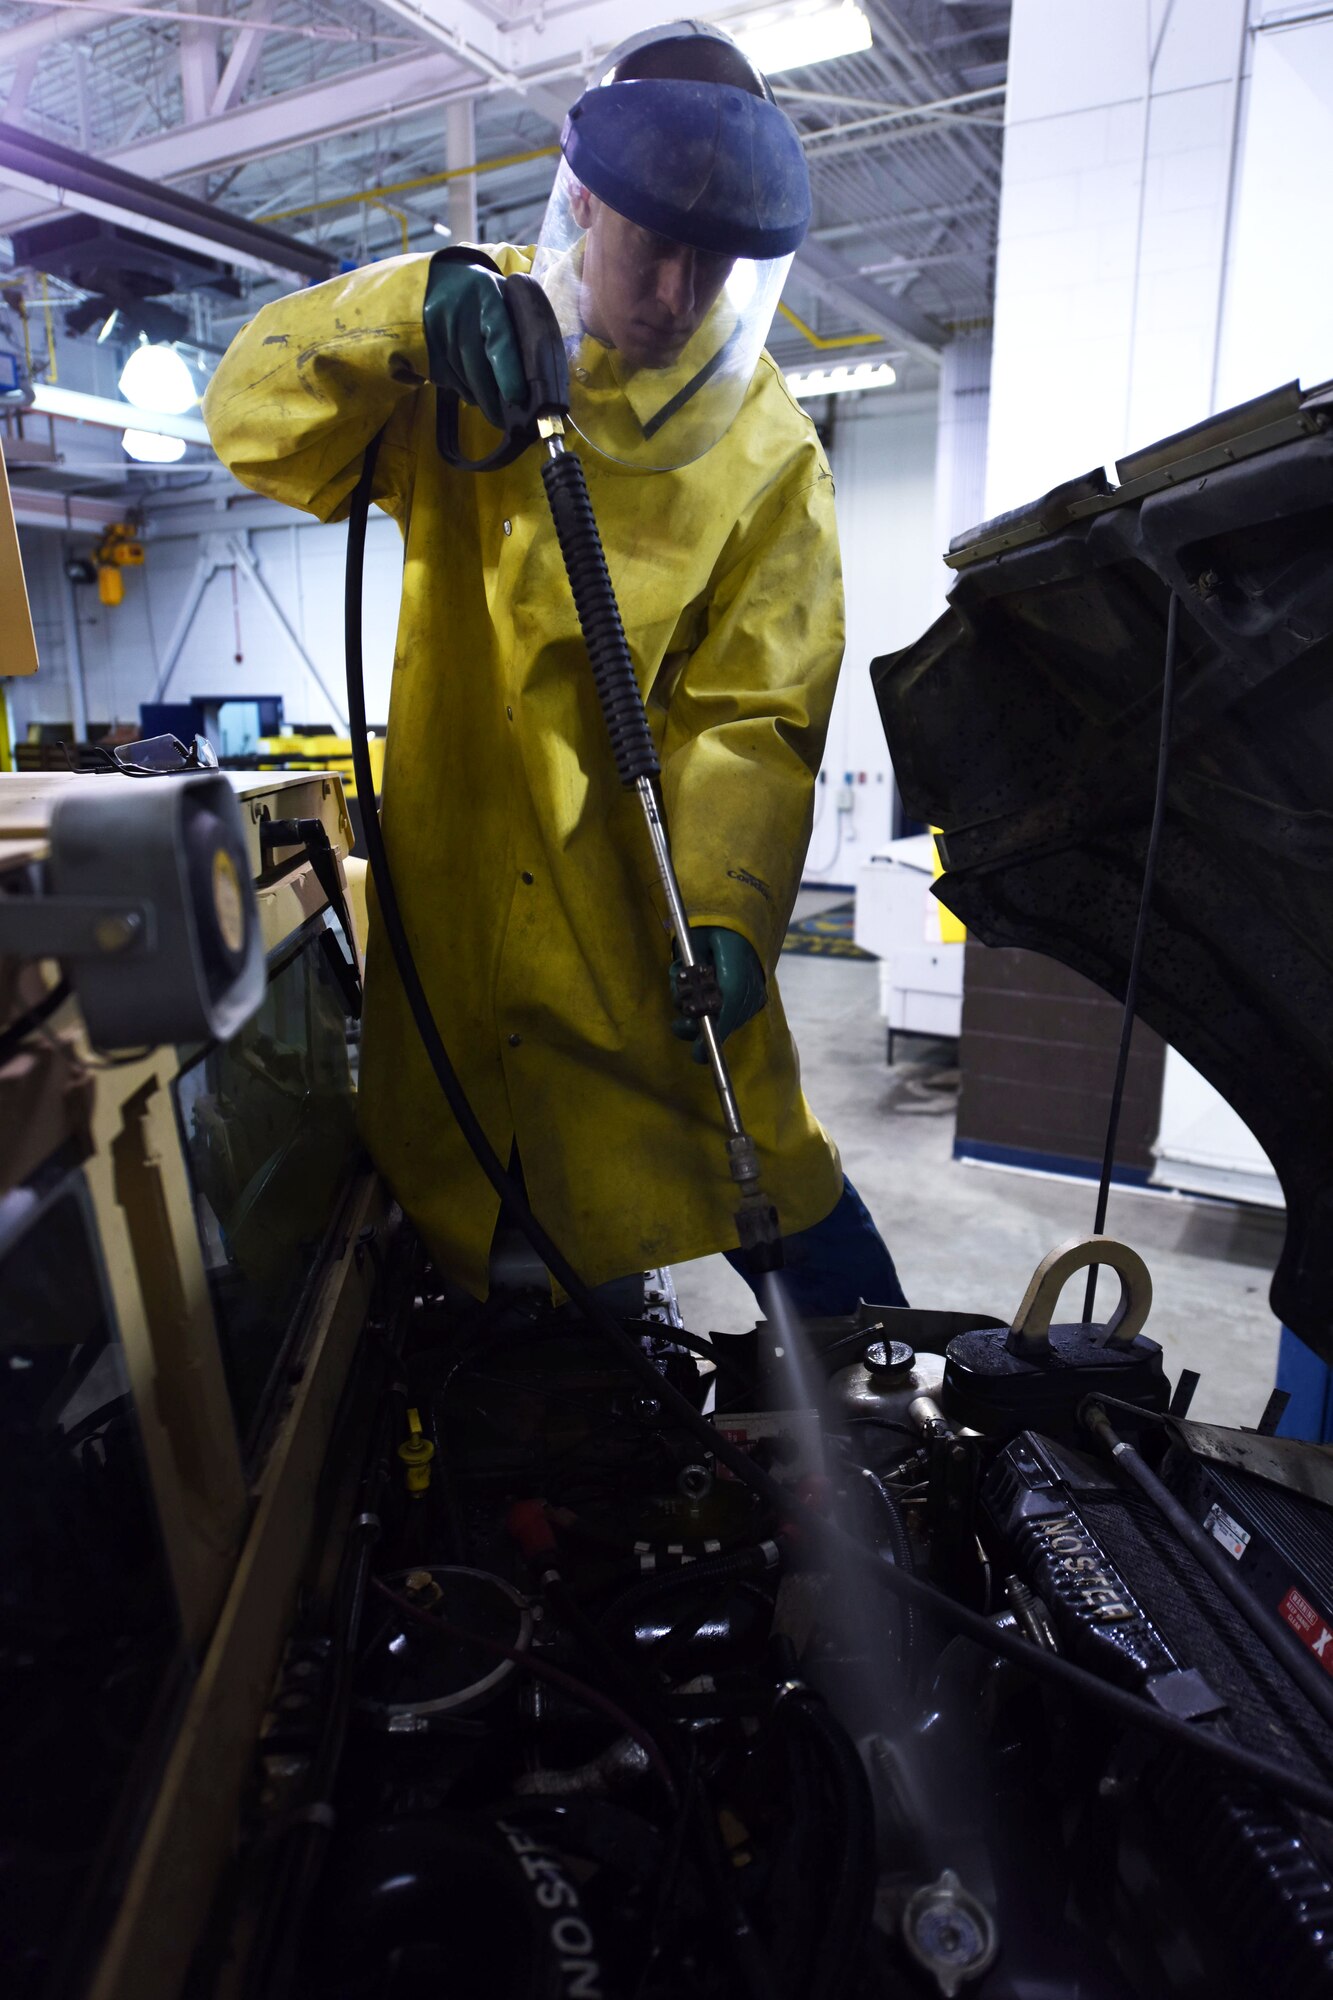 Senior Airman Zachary Simmons, 341st Logistics Readiness Squadron vehicle maintenance journeyman, cleans the engine housing of a Humvee at Malmstrom Air Force Base, Mont., during exercise GLOBAL THUNDER 16, Nov. 6, 2015. The 341st Logistics Readiness Squadron is part of U.S. Strategic Command’s (USSTRATCOM) Task Force 214 and supports the command’s strategic deterrence mission by operating and maintaining the Air Force’s Intercontinental Ballistic Missile force. GLOBAL THUNDER is an annual U.S. Strategic Command training event that assesses command and control functionality in all USSTRATCOM mission areas and affords component commands a venue to evaluate their joint operational readiness. Planning for GLOBAL THUNDER 16 has been under way for more than a year and is based on a notional scenario with fictitious adversaries. USSTRATCOM, one of nine DoD unified combatant commands, relies on various task forces for the execution of its global missions, which also include space operations; cyberspace operations; joint electronic warfare; global strike; missile defense; intelligence, surveillance and reconnaissance; combating weapons of mass destruction; and analysis and targeting. (U.S. Air Force photo by Airman Collin Schmidt)